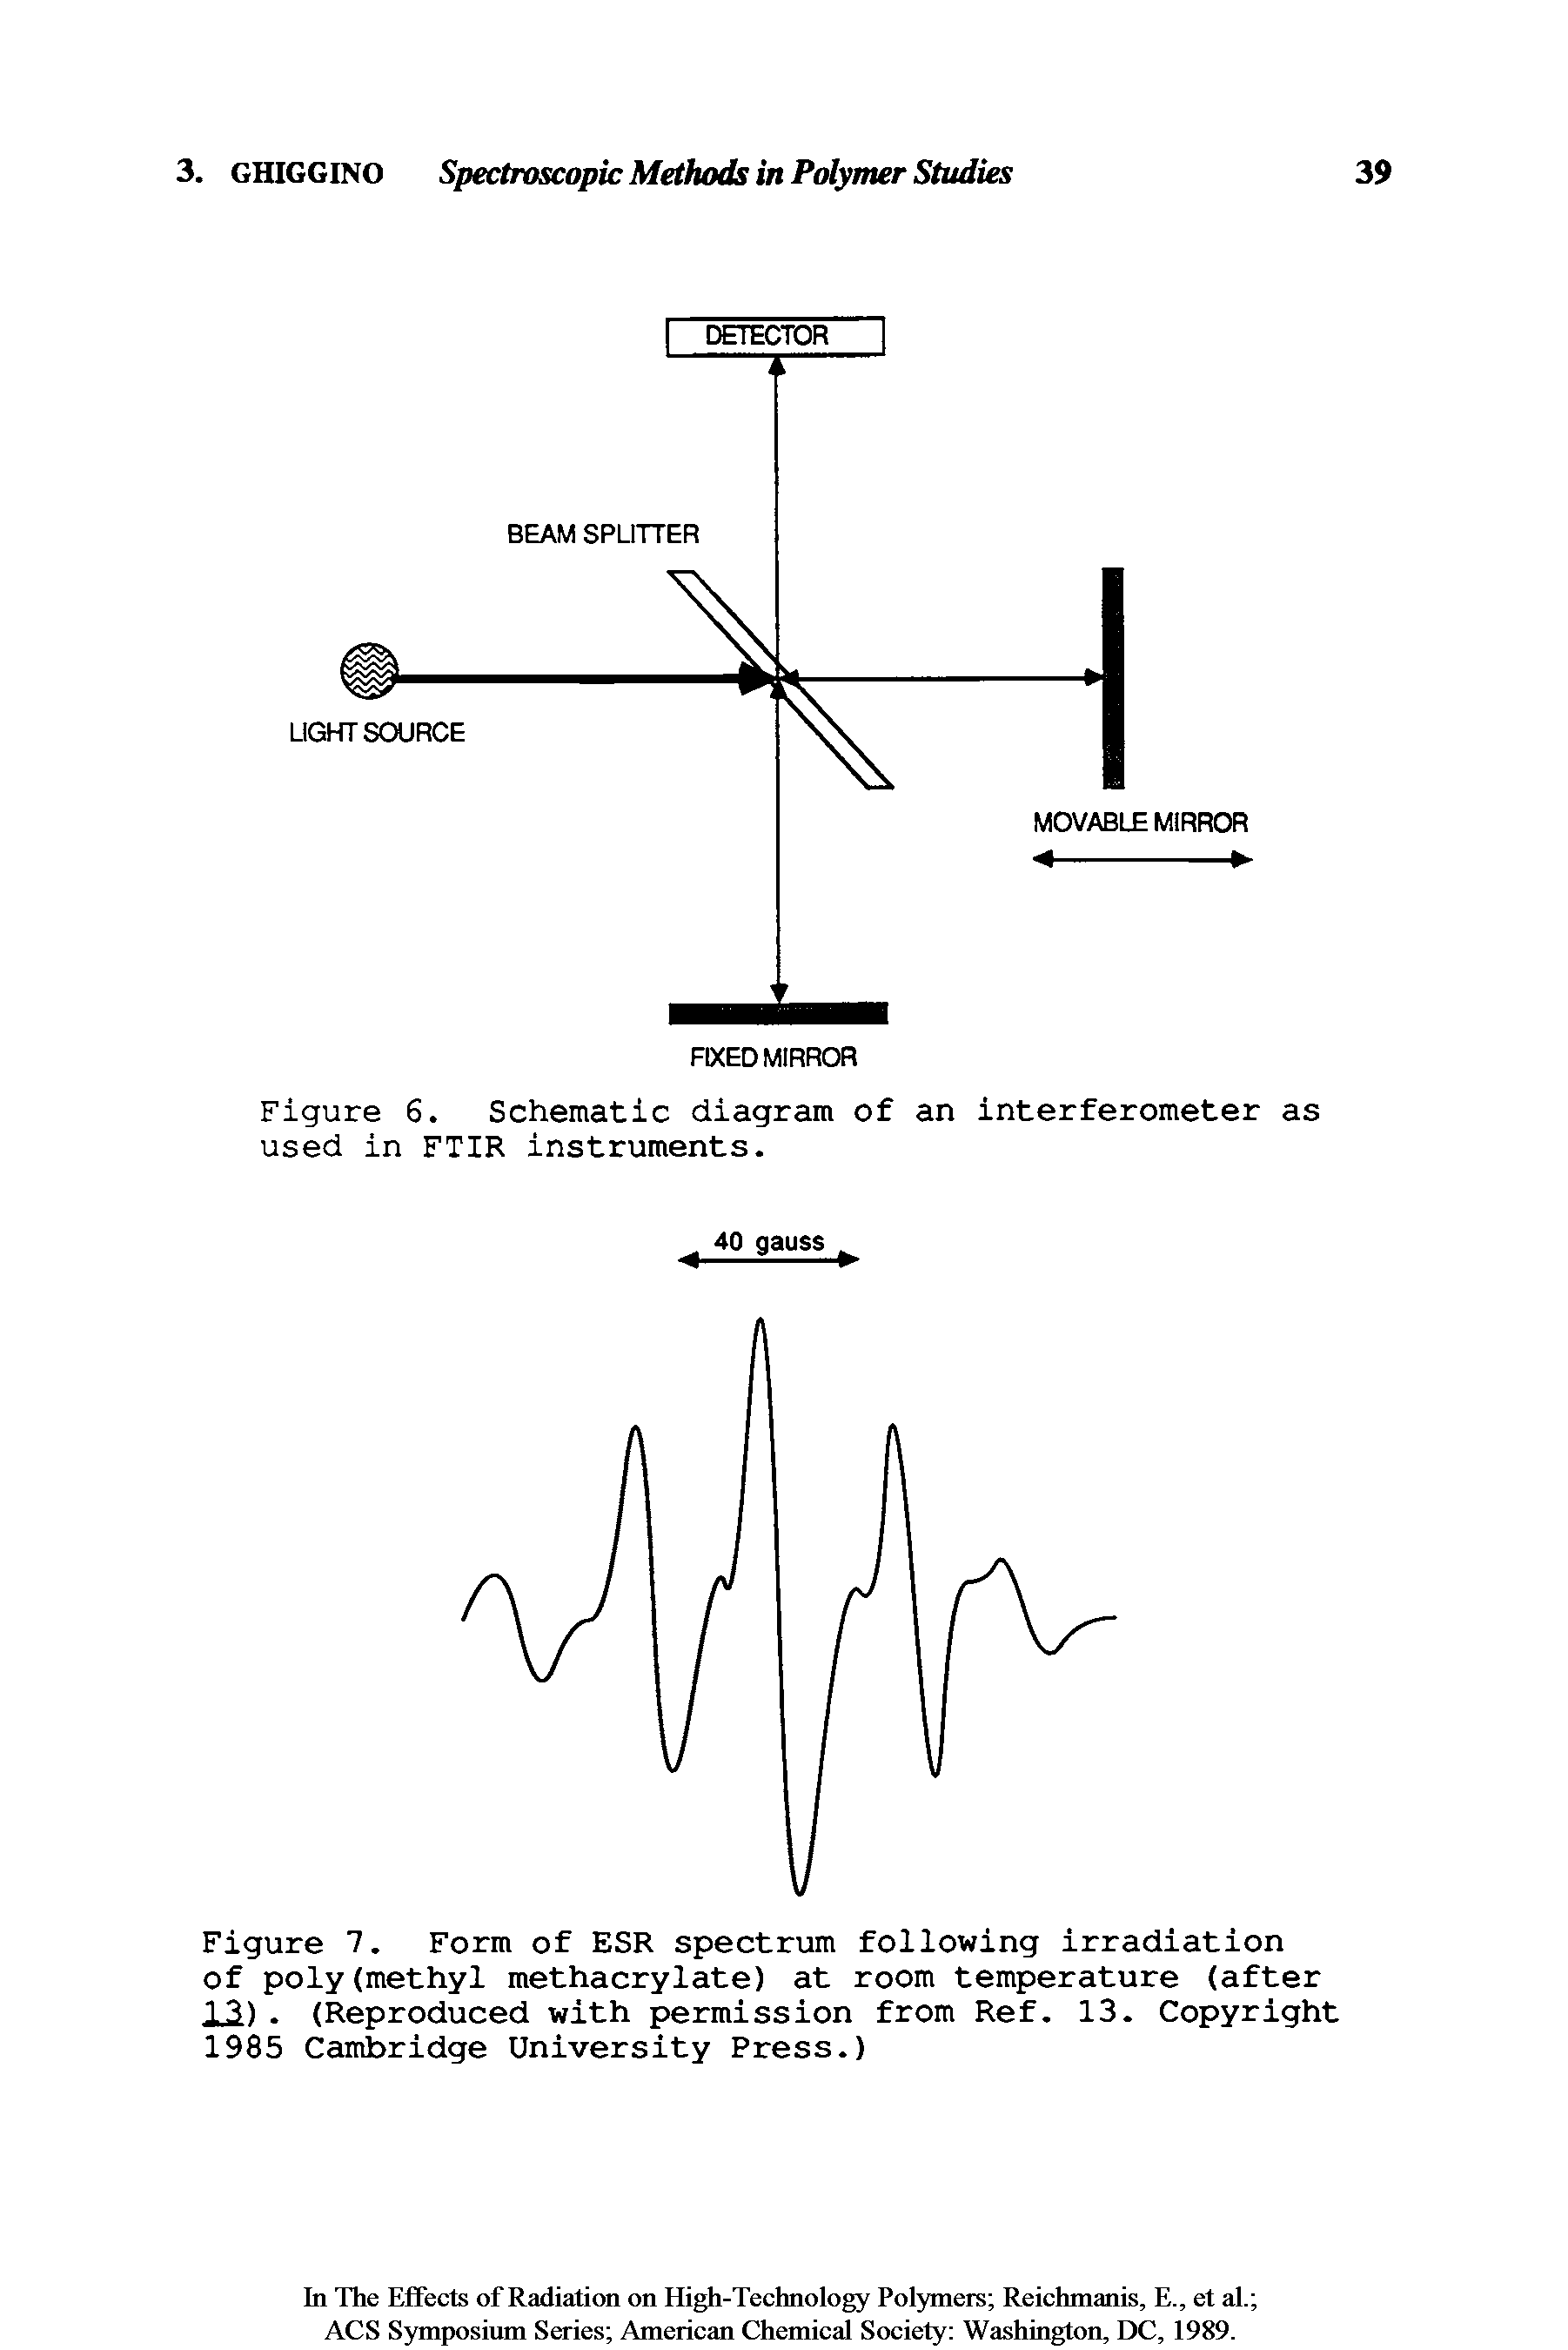 Figure 6. Schematic diagram of an interferometer as used in FTIR instruments.